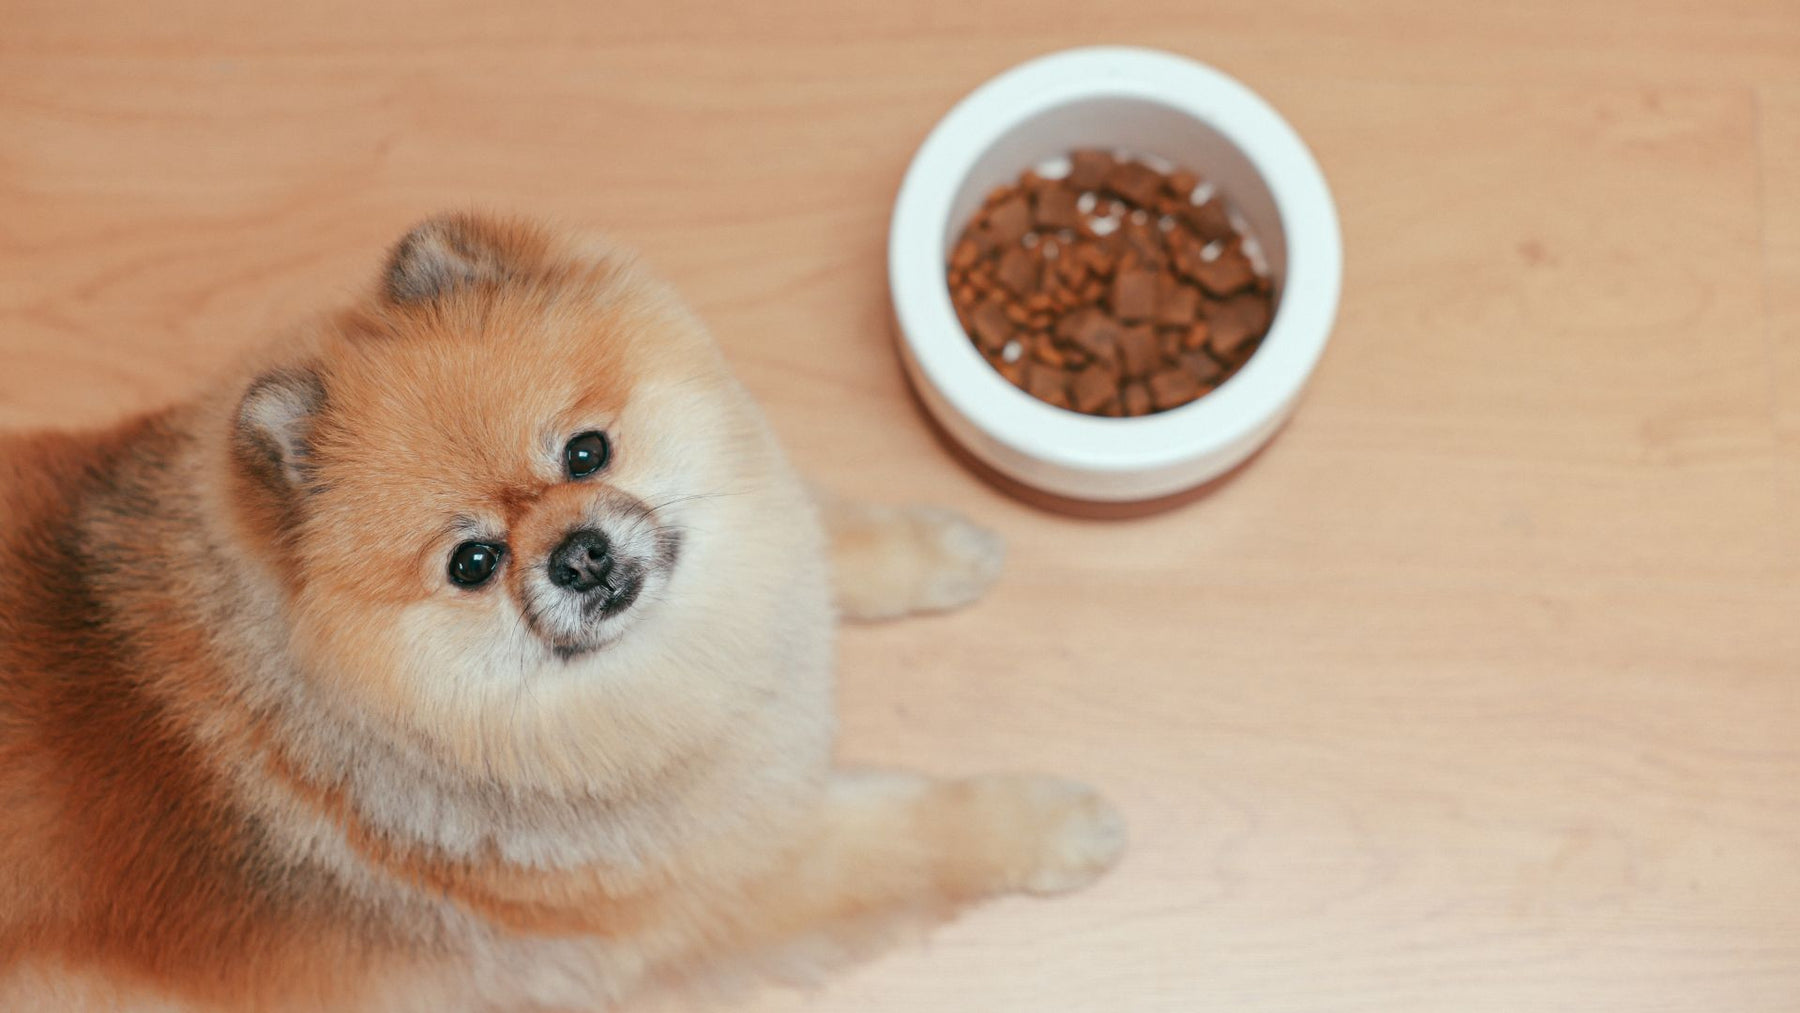 From Chocolates to Grapes: Foods That Can Endanger Your Dog's Health